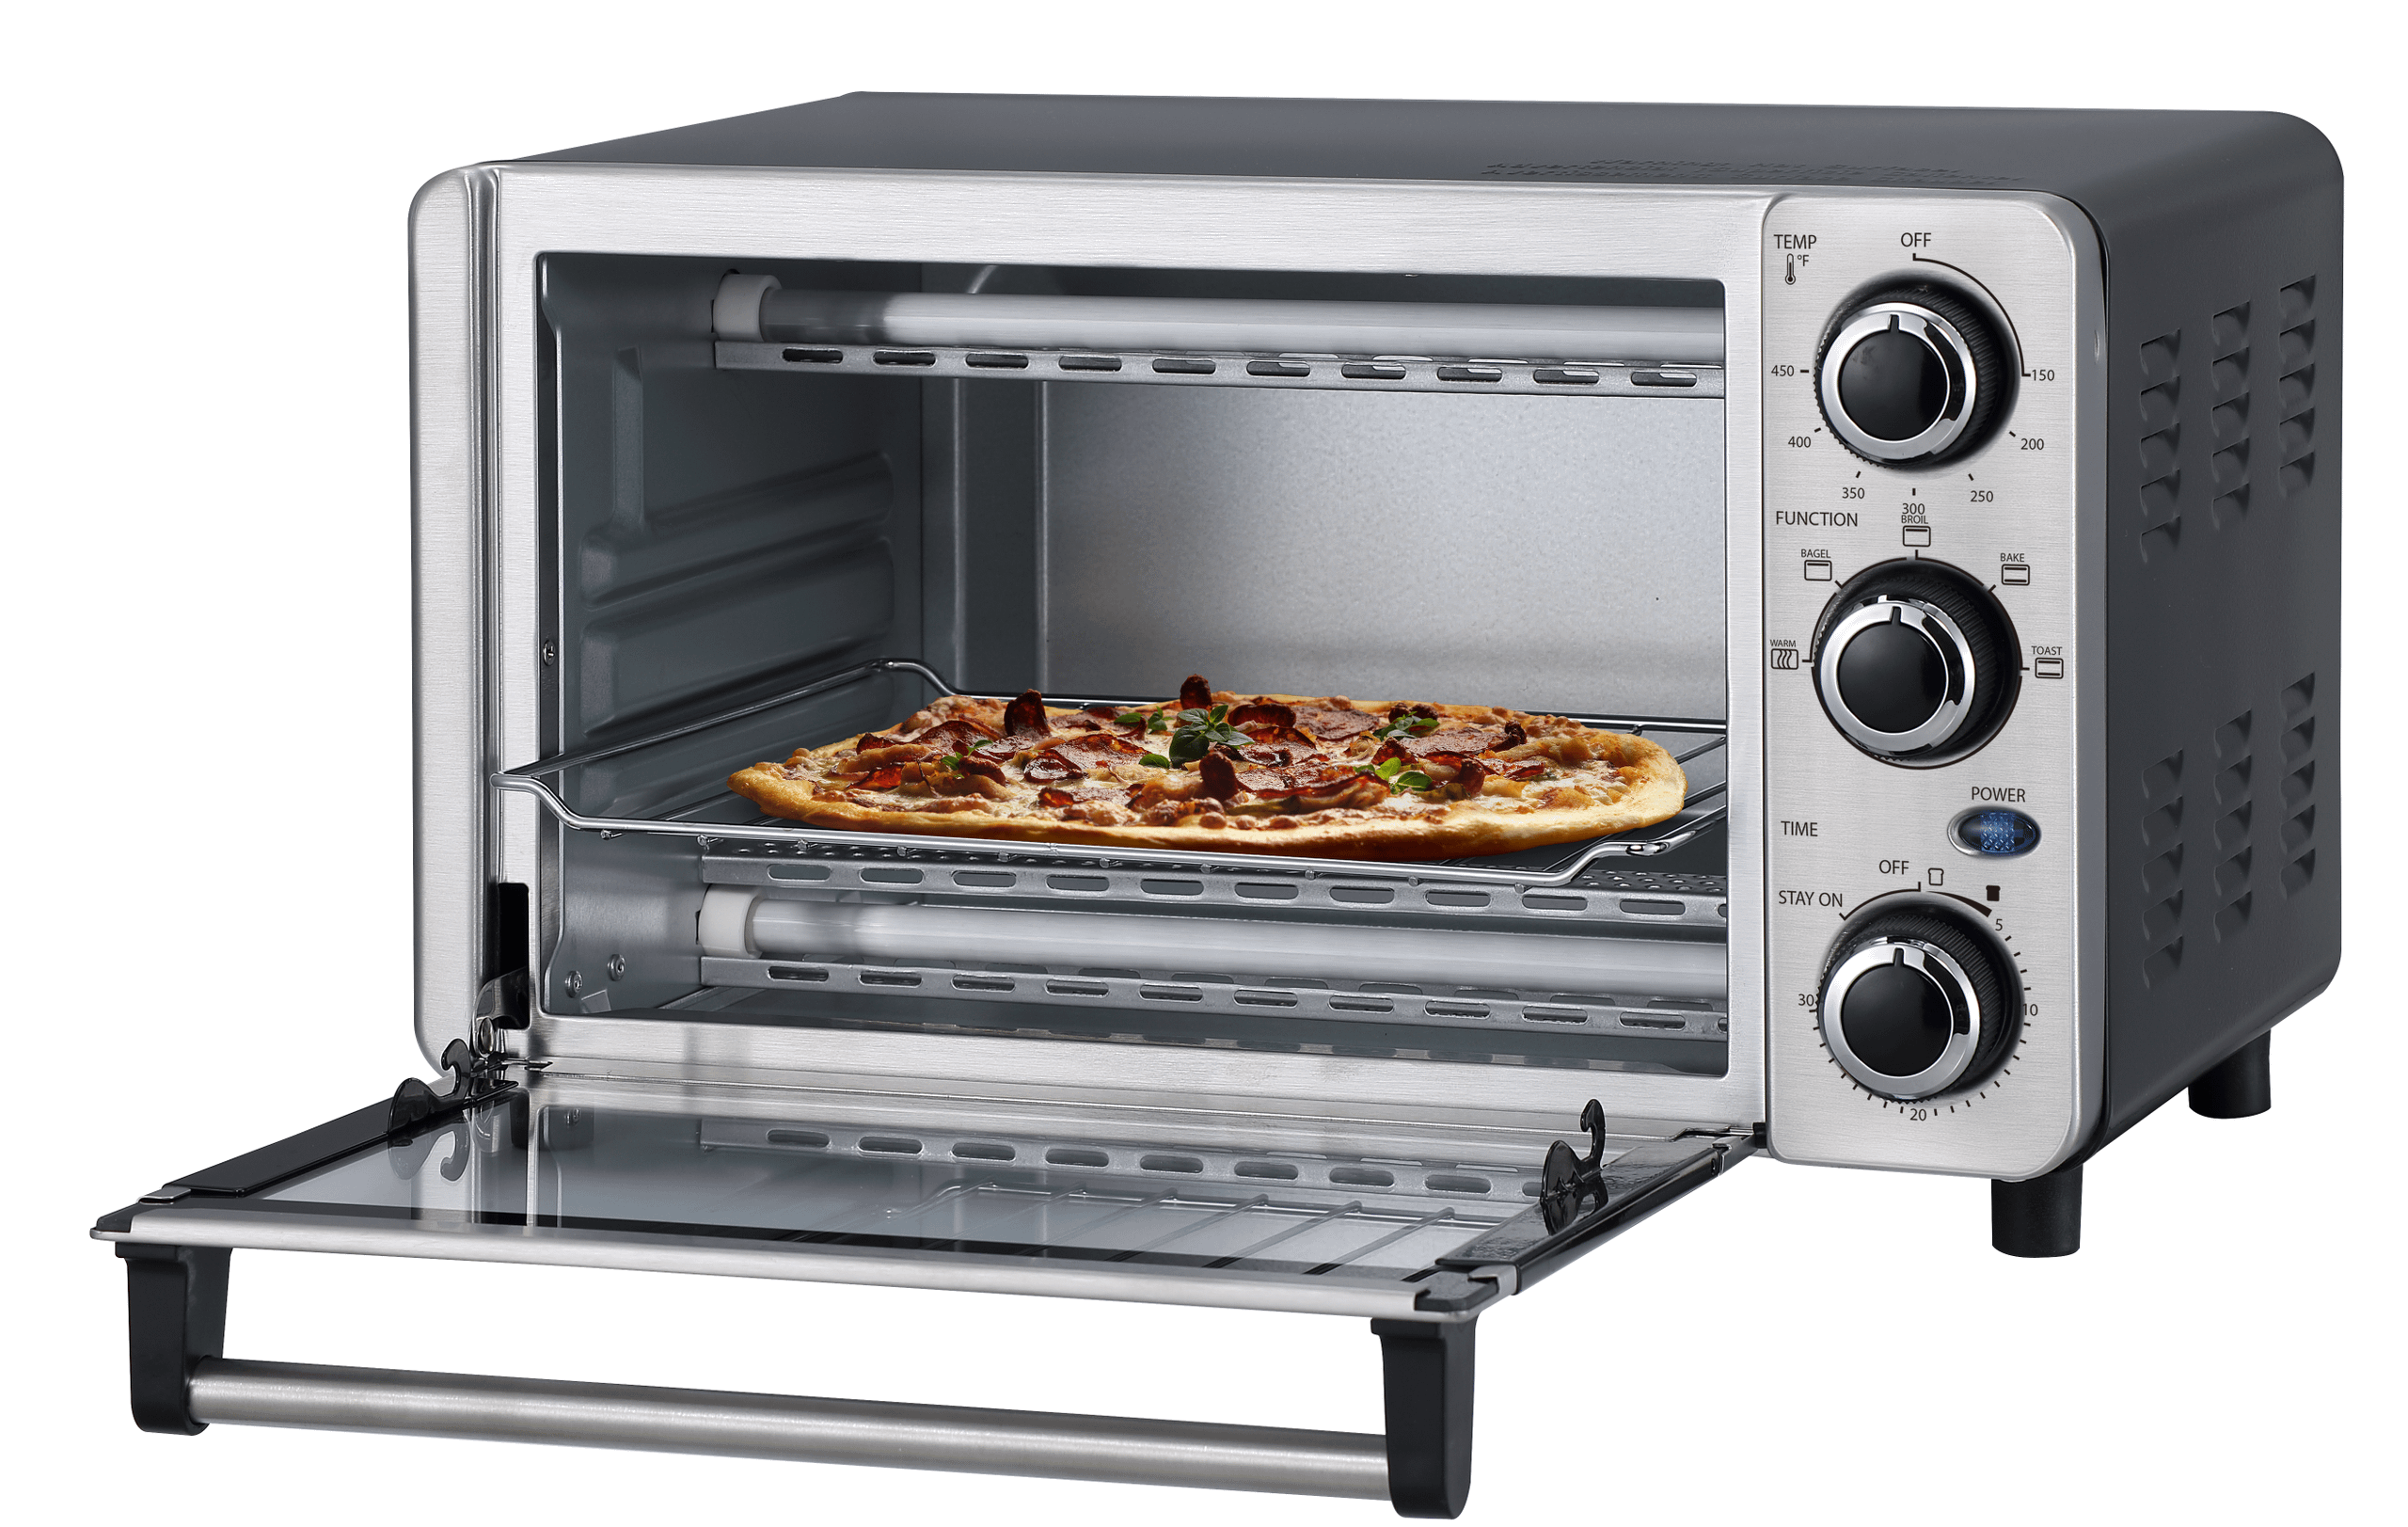 Danby 0.4 cu. ft./12L 4 Slice Countertop Toaster Oven in Stainless Steel